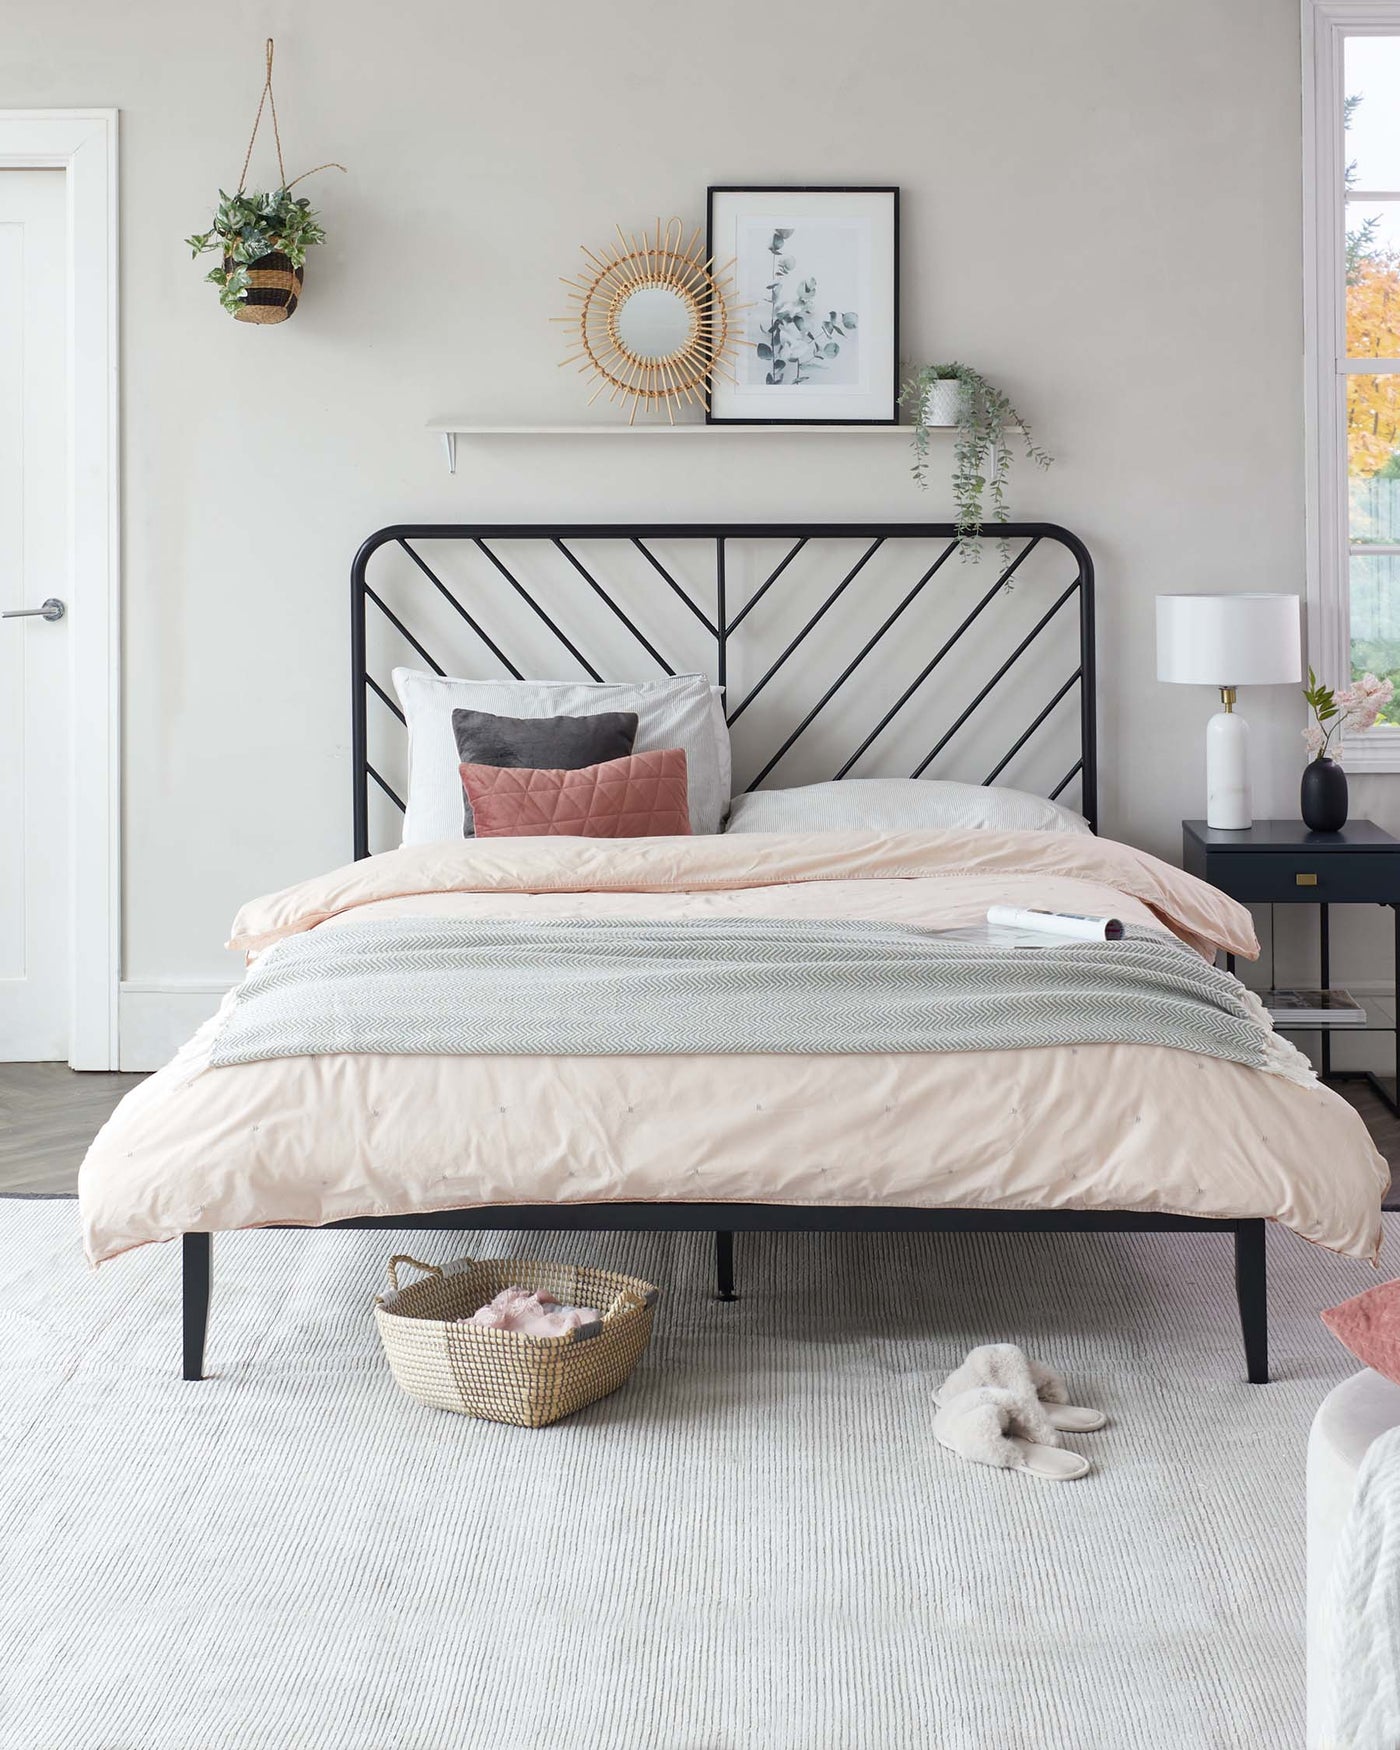 A black metal bed frame with a clean-lined headboard featuring geometric patterns, accompanied by a minimalist black bedside table with a drawer, set on a textured light-coloured area rug.